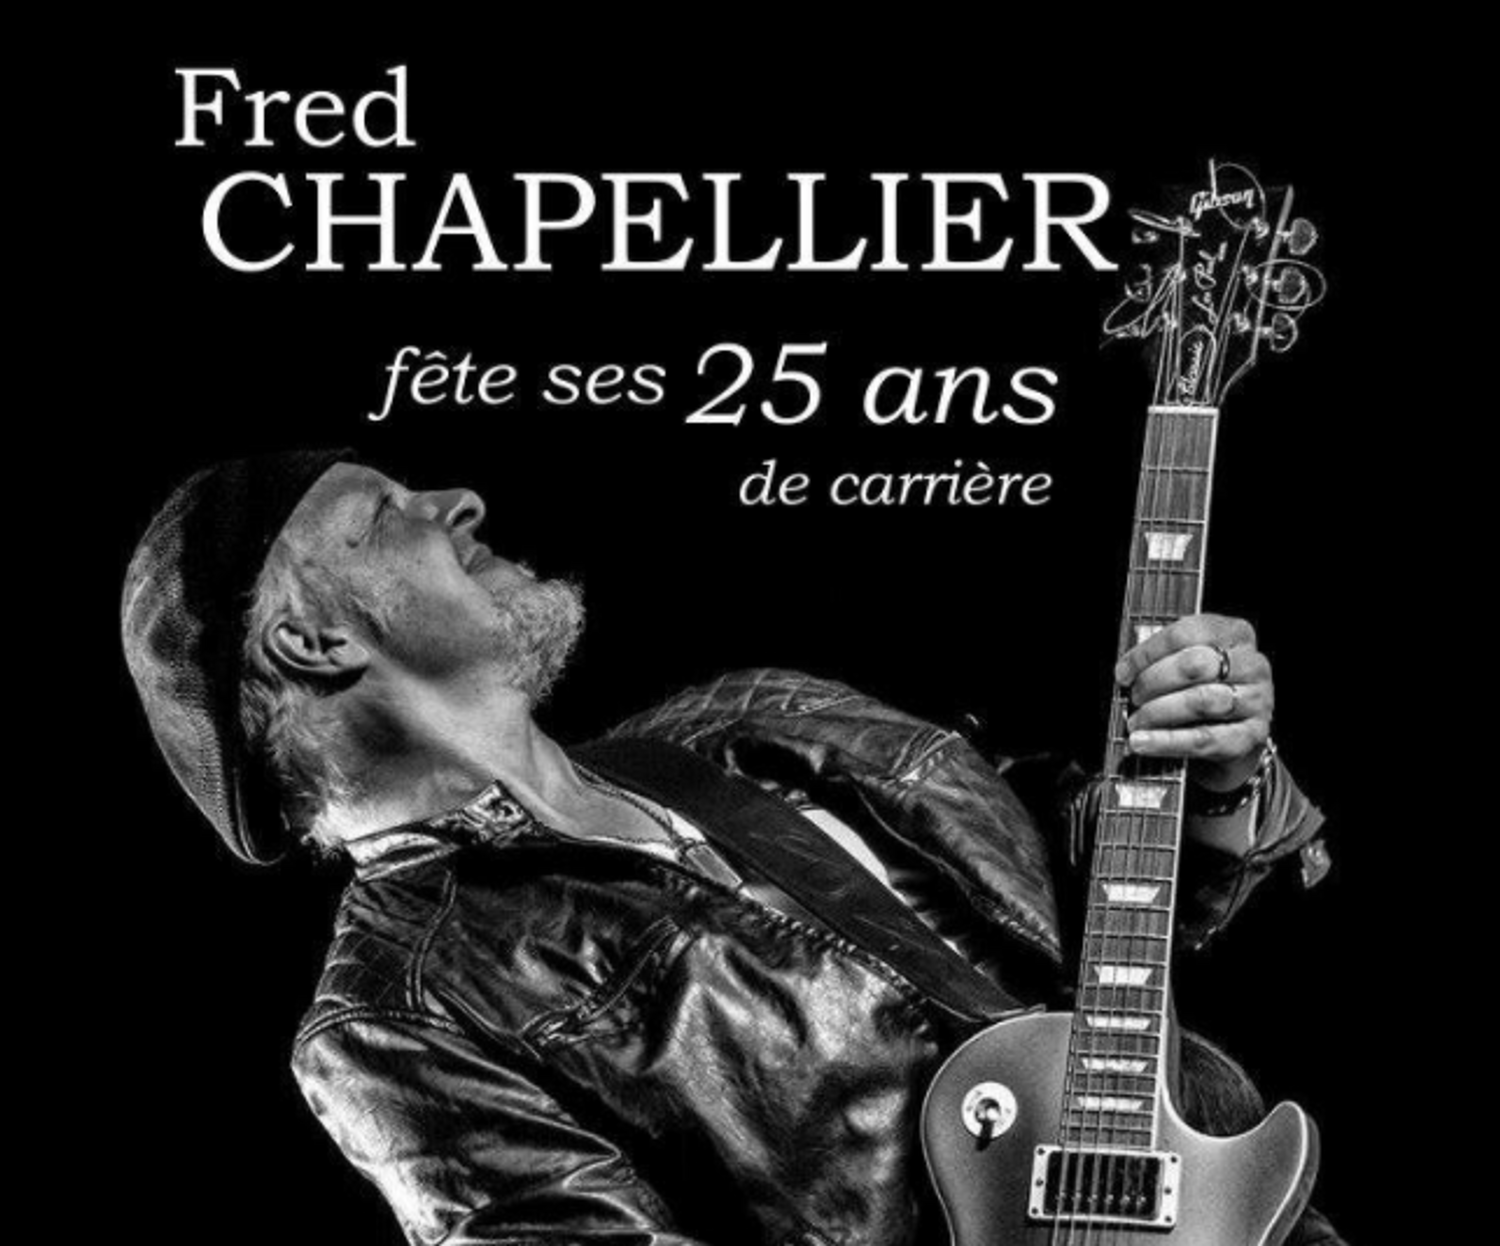 Fred Chapellier 